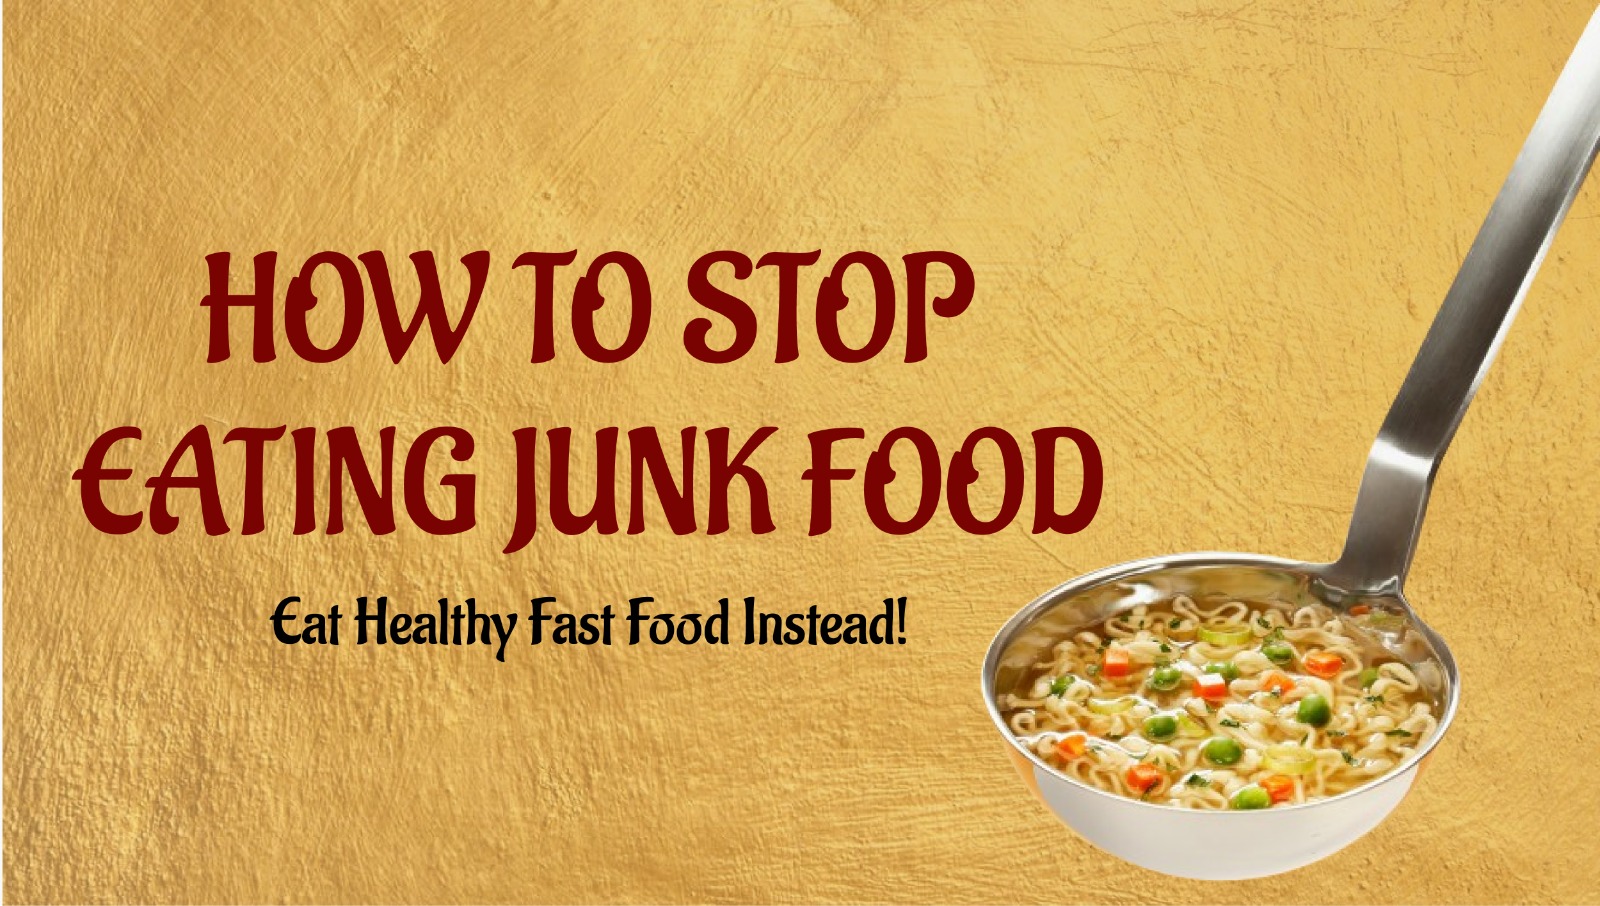 eat healthy fast food instead of junk food after workout